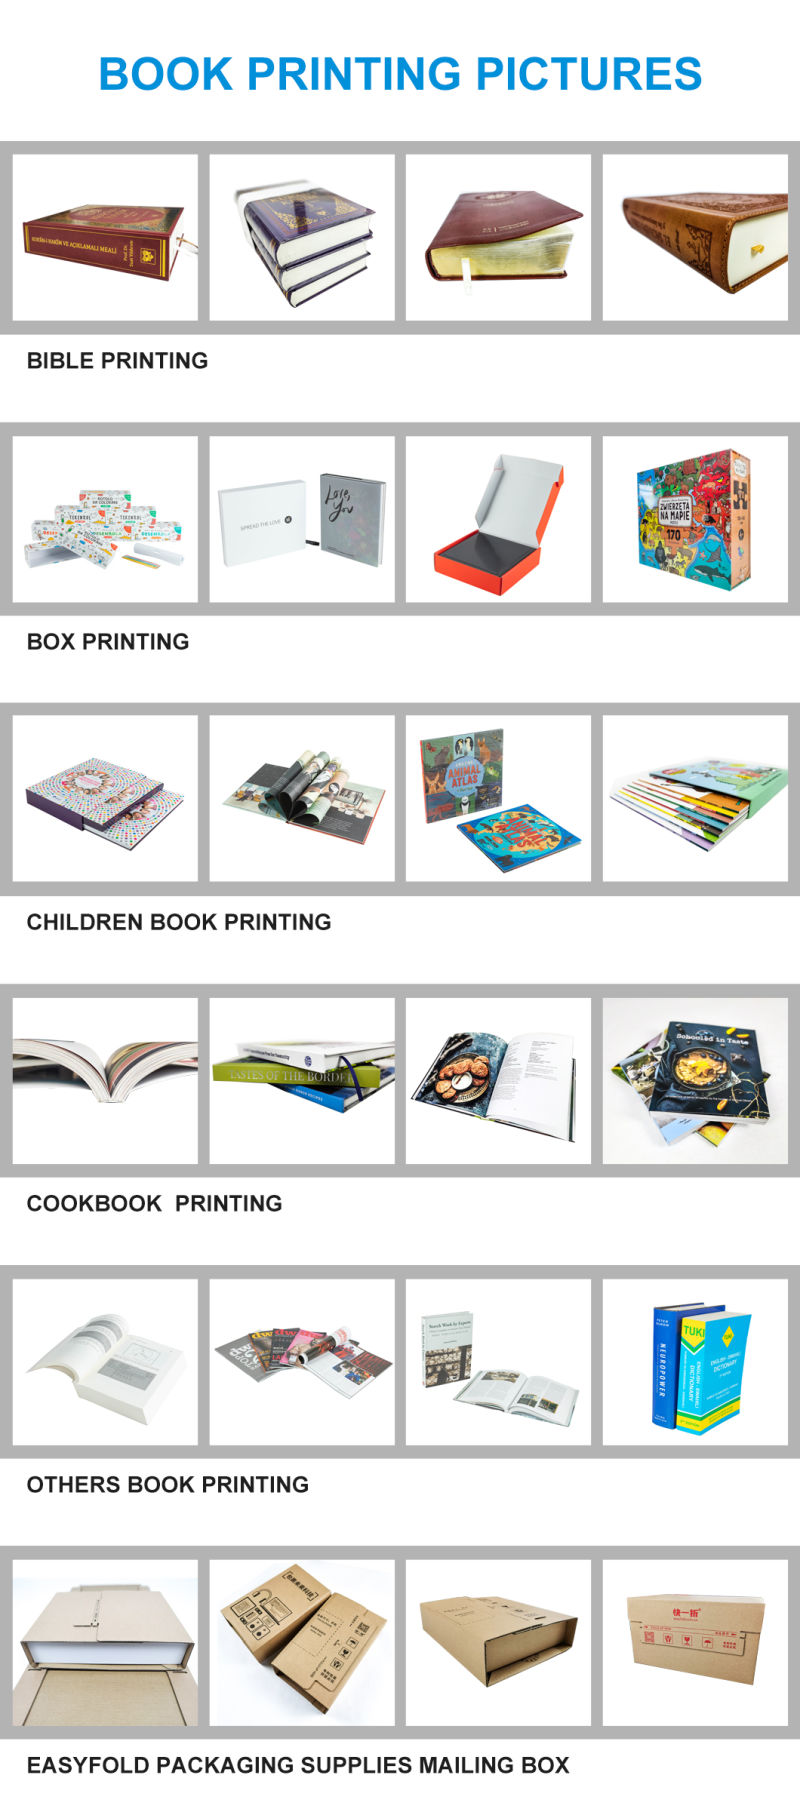 Books Picture Hardcover Book Printing China Book Printing Children Book Printing